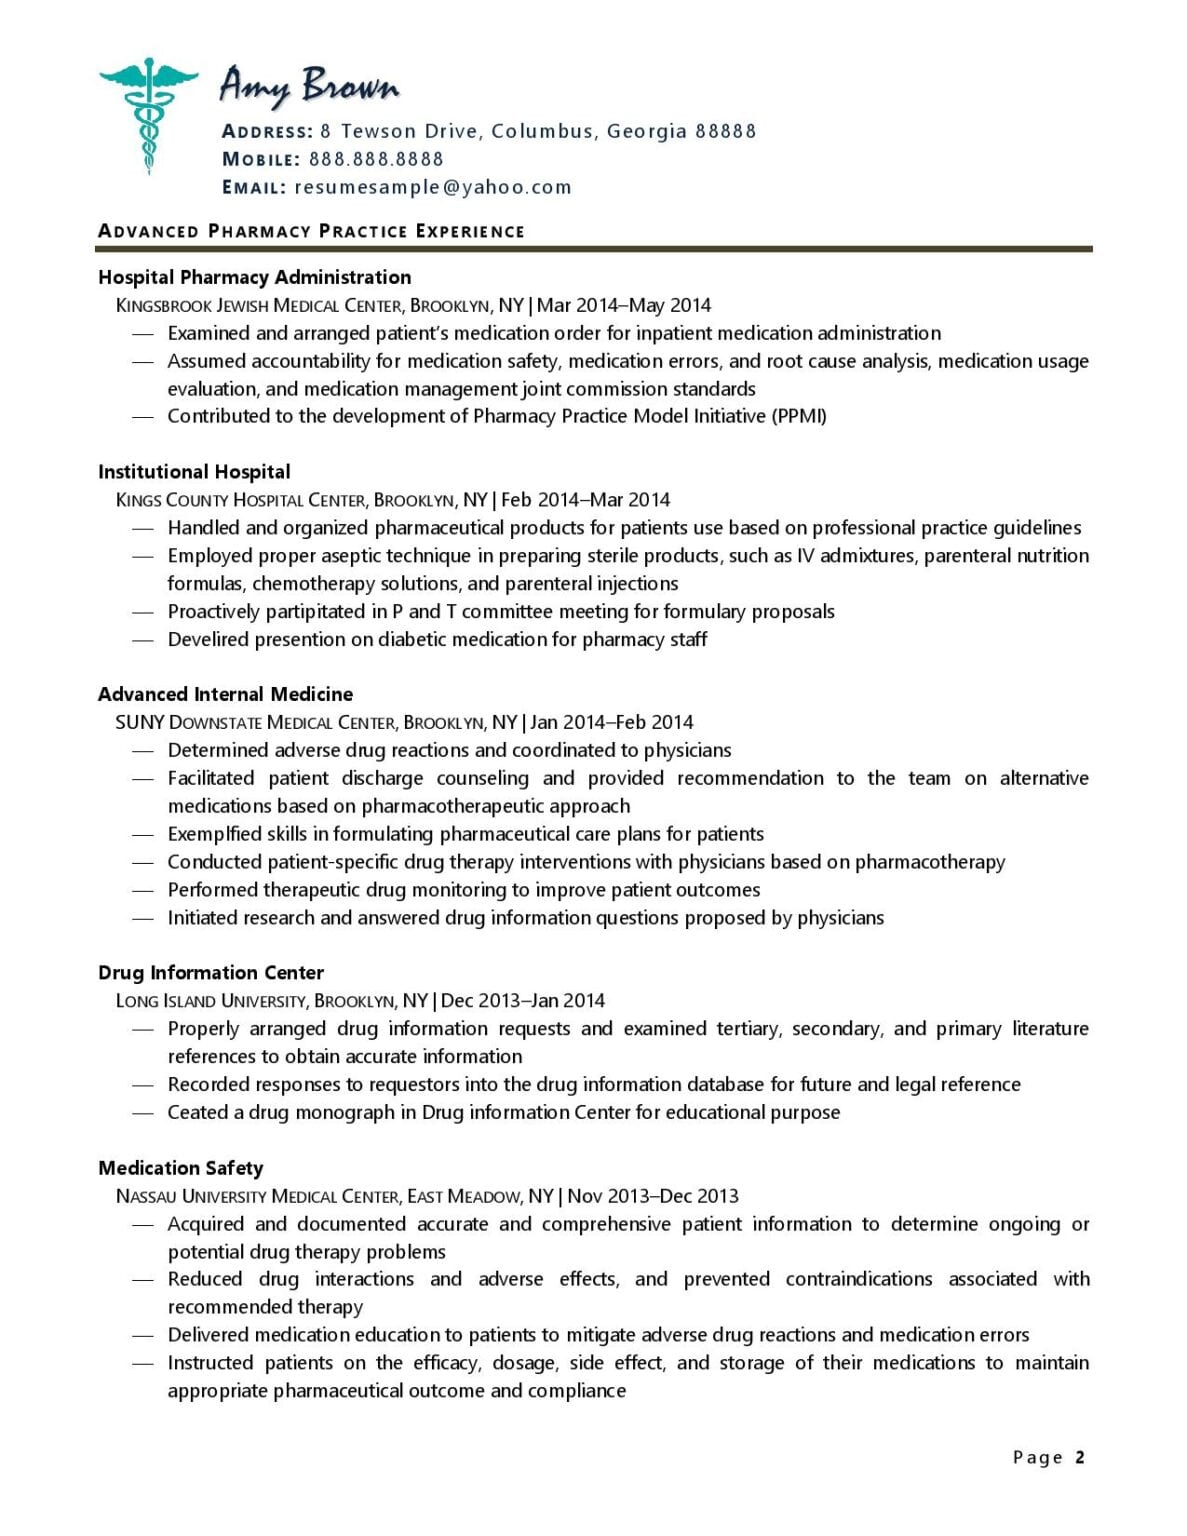 resume objective examples for industrial pharmacist